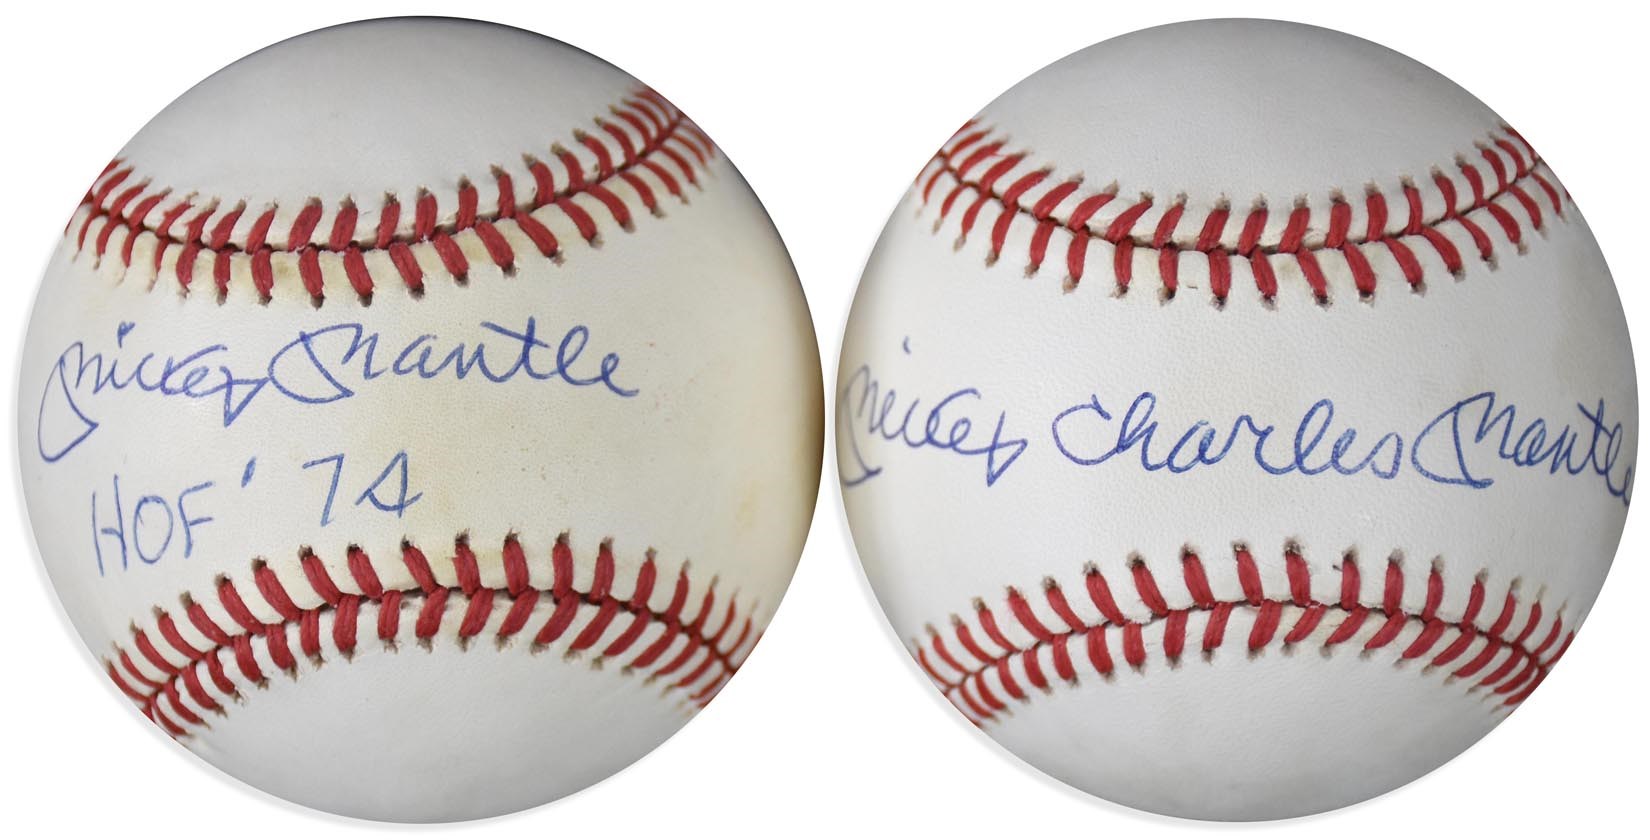 Mantle and Maris - Mickey "Charles" Mantle and "HOF 1974" Signed Baseballs (2)